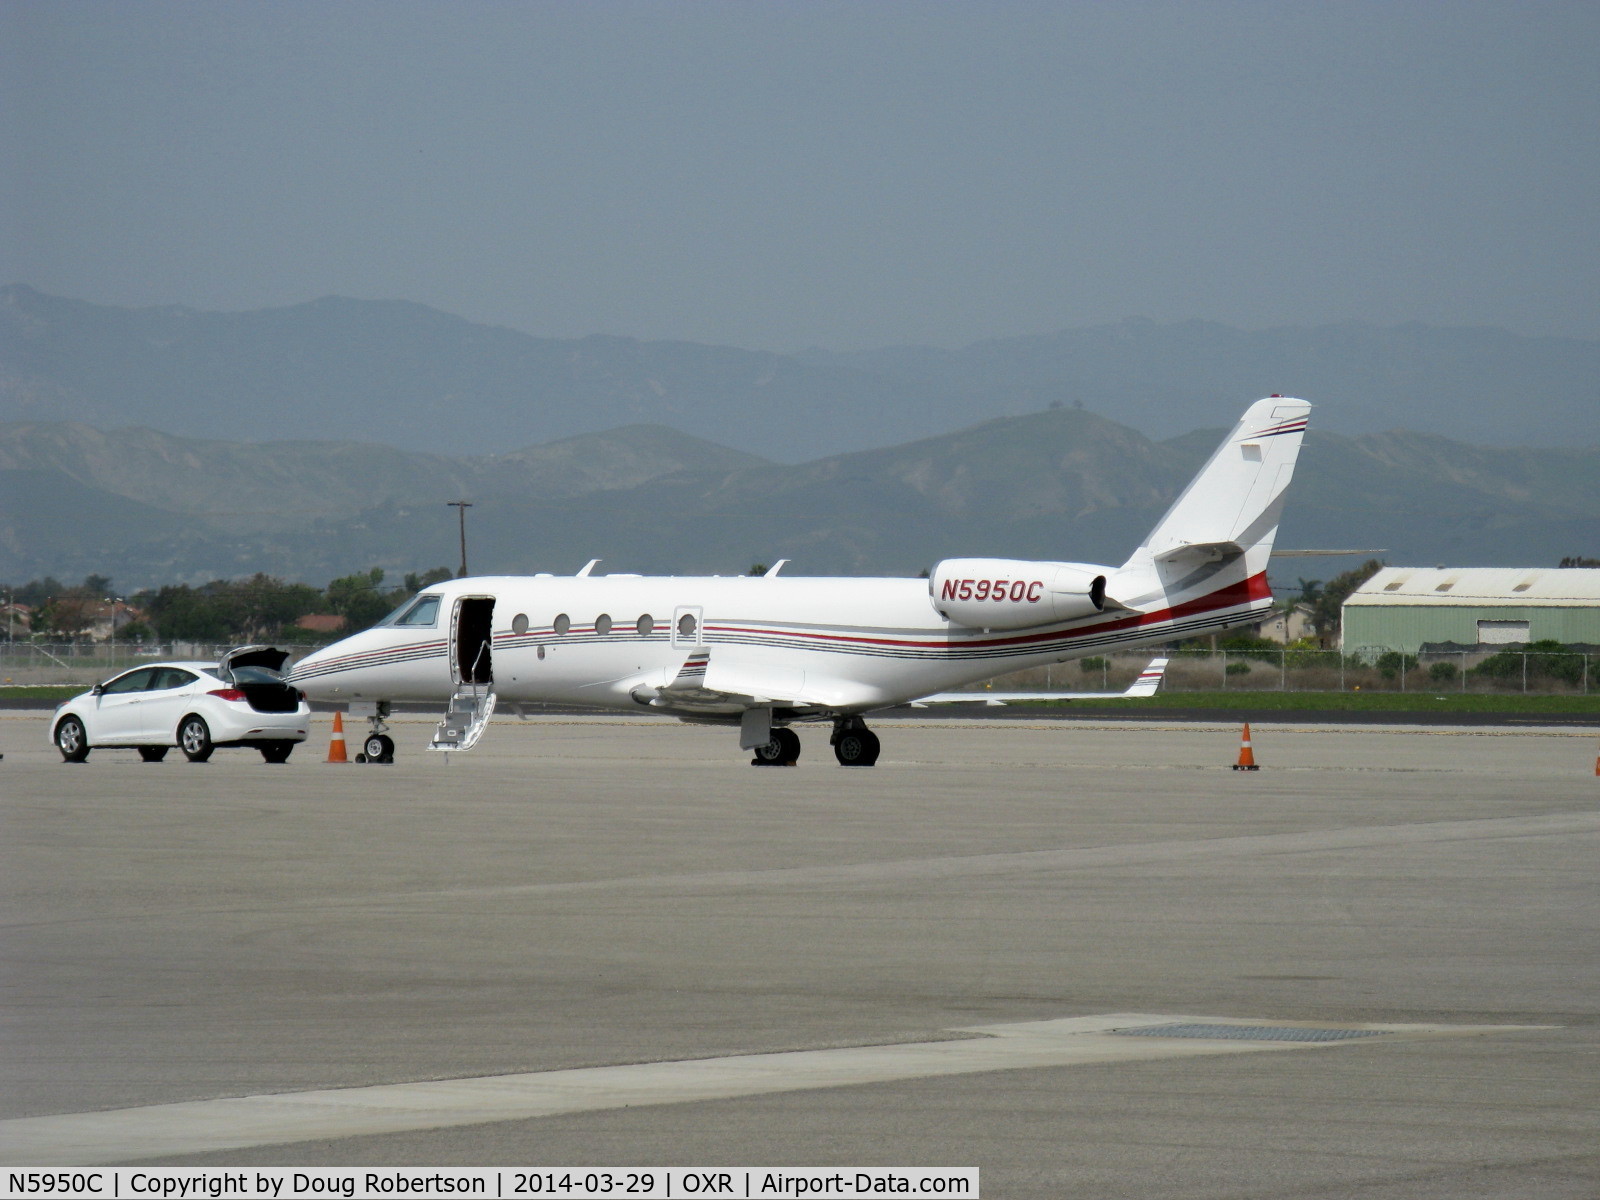 N5950C, 2006 Israel Aircraft Industries Gulfstream G150 C/N 213, 2006 Israel Aircraft Inds. GULFSTREAM G150, 2 Honeywell TFE731-40AR-200G TFs w/FADEC 4,420 lb st ea. Are flown from Israel to Dallas, TX for finishing. FAA certificated as ext. to 1125 Westwind ASTRA cert.